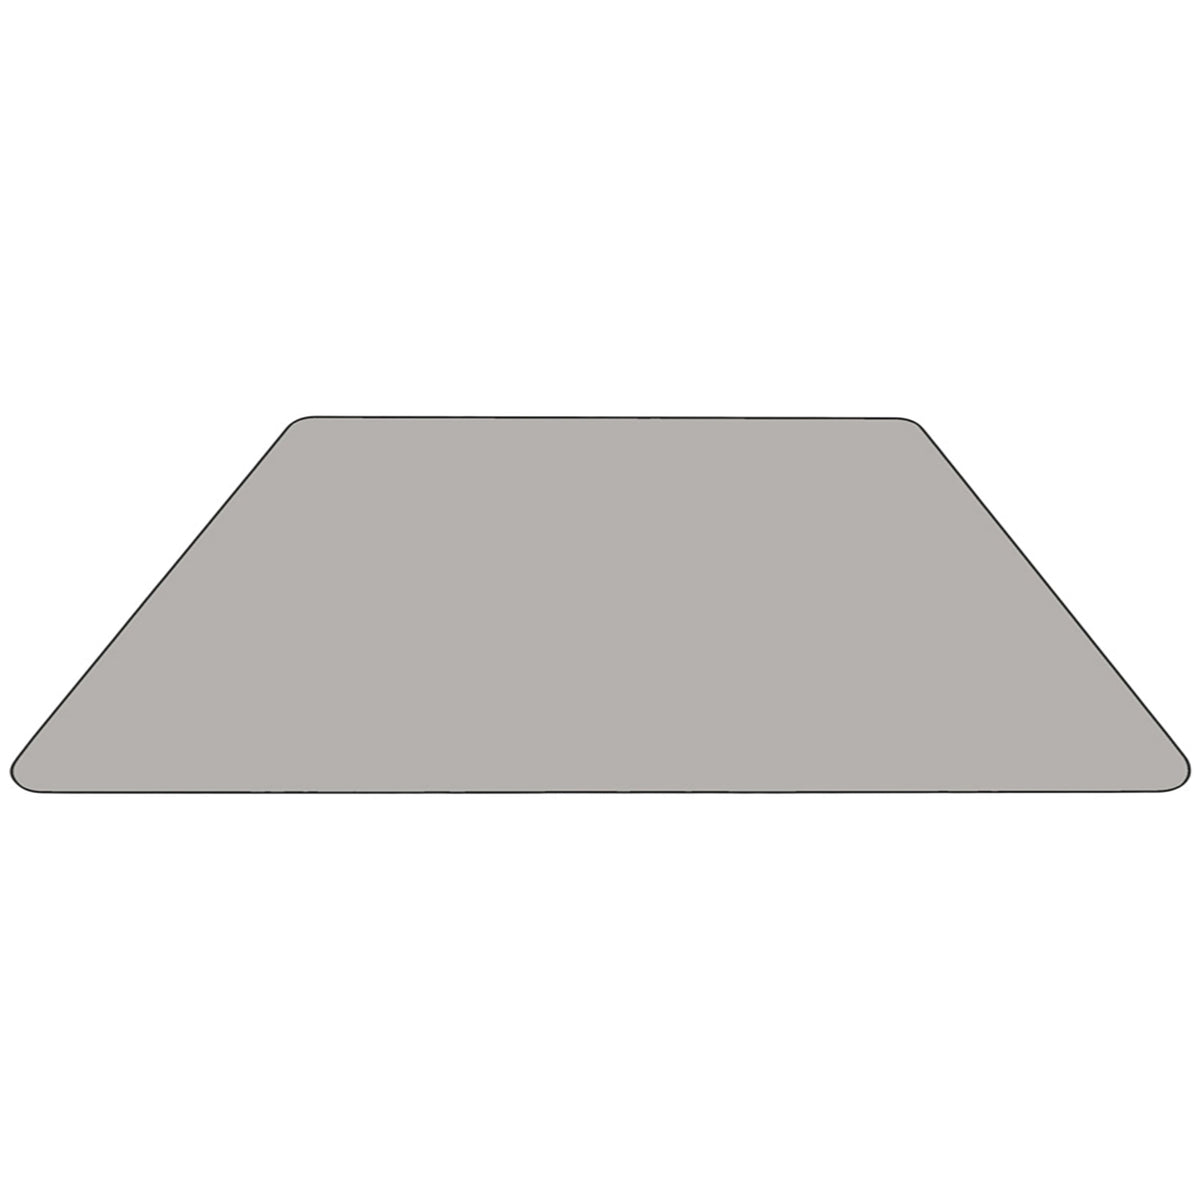 Gray |#| Mobile 29inchW x 57inchL Trapezoid Grey Laminate Adjustable Activity Table